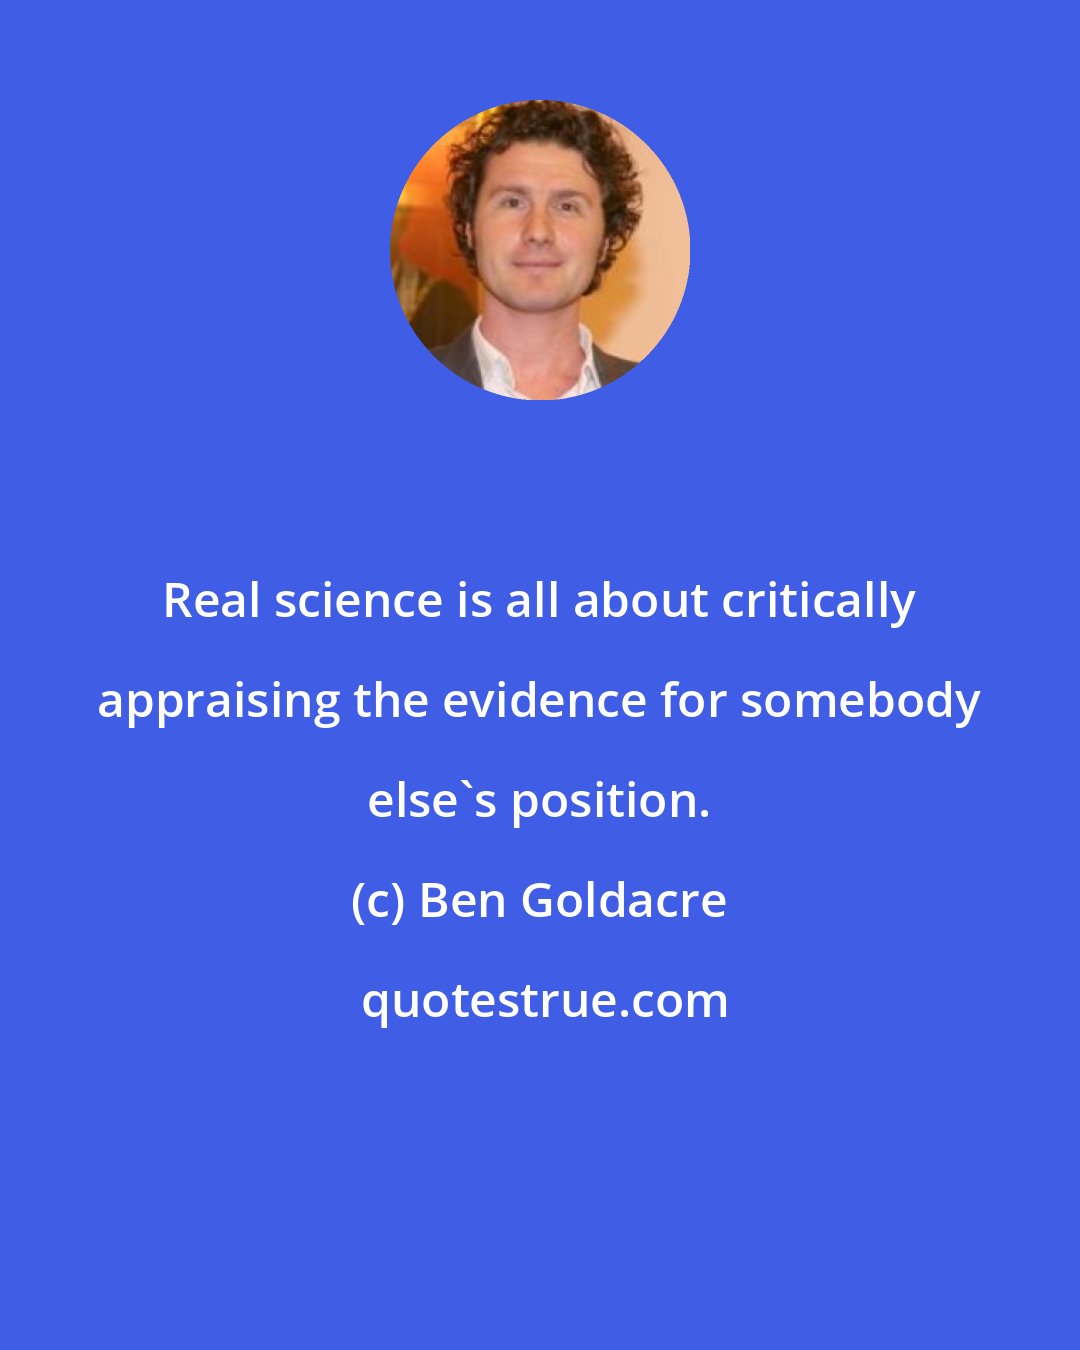 Ben Goldacre: Real science is all about critically appraising the evidence for somebody else's position.